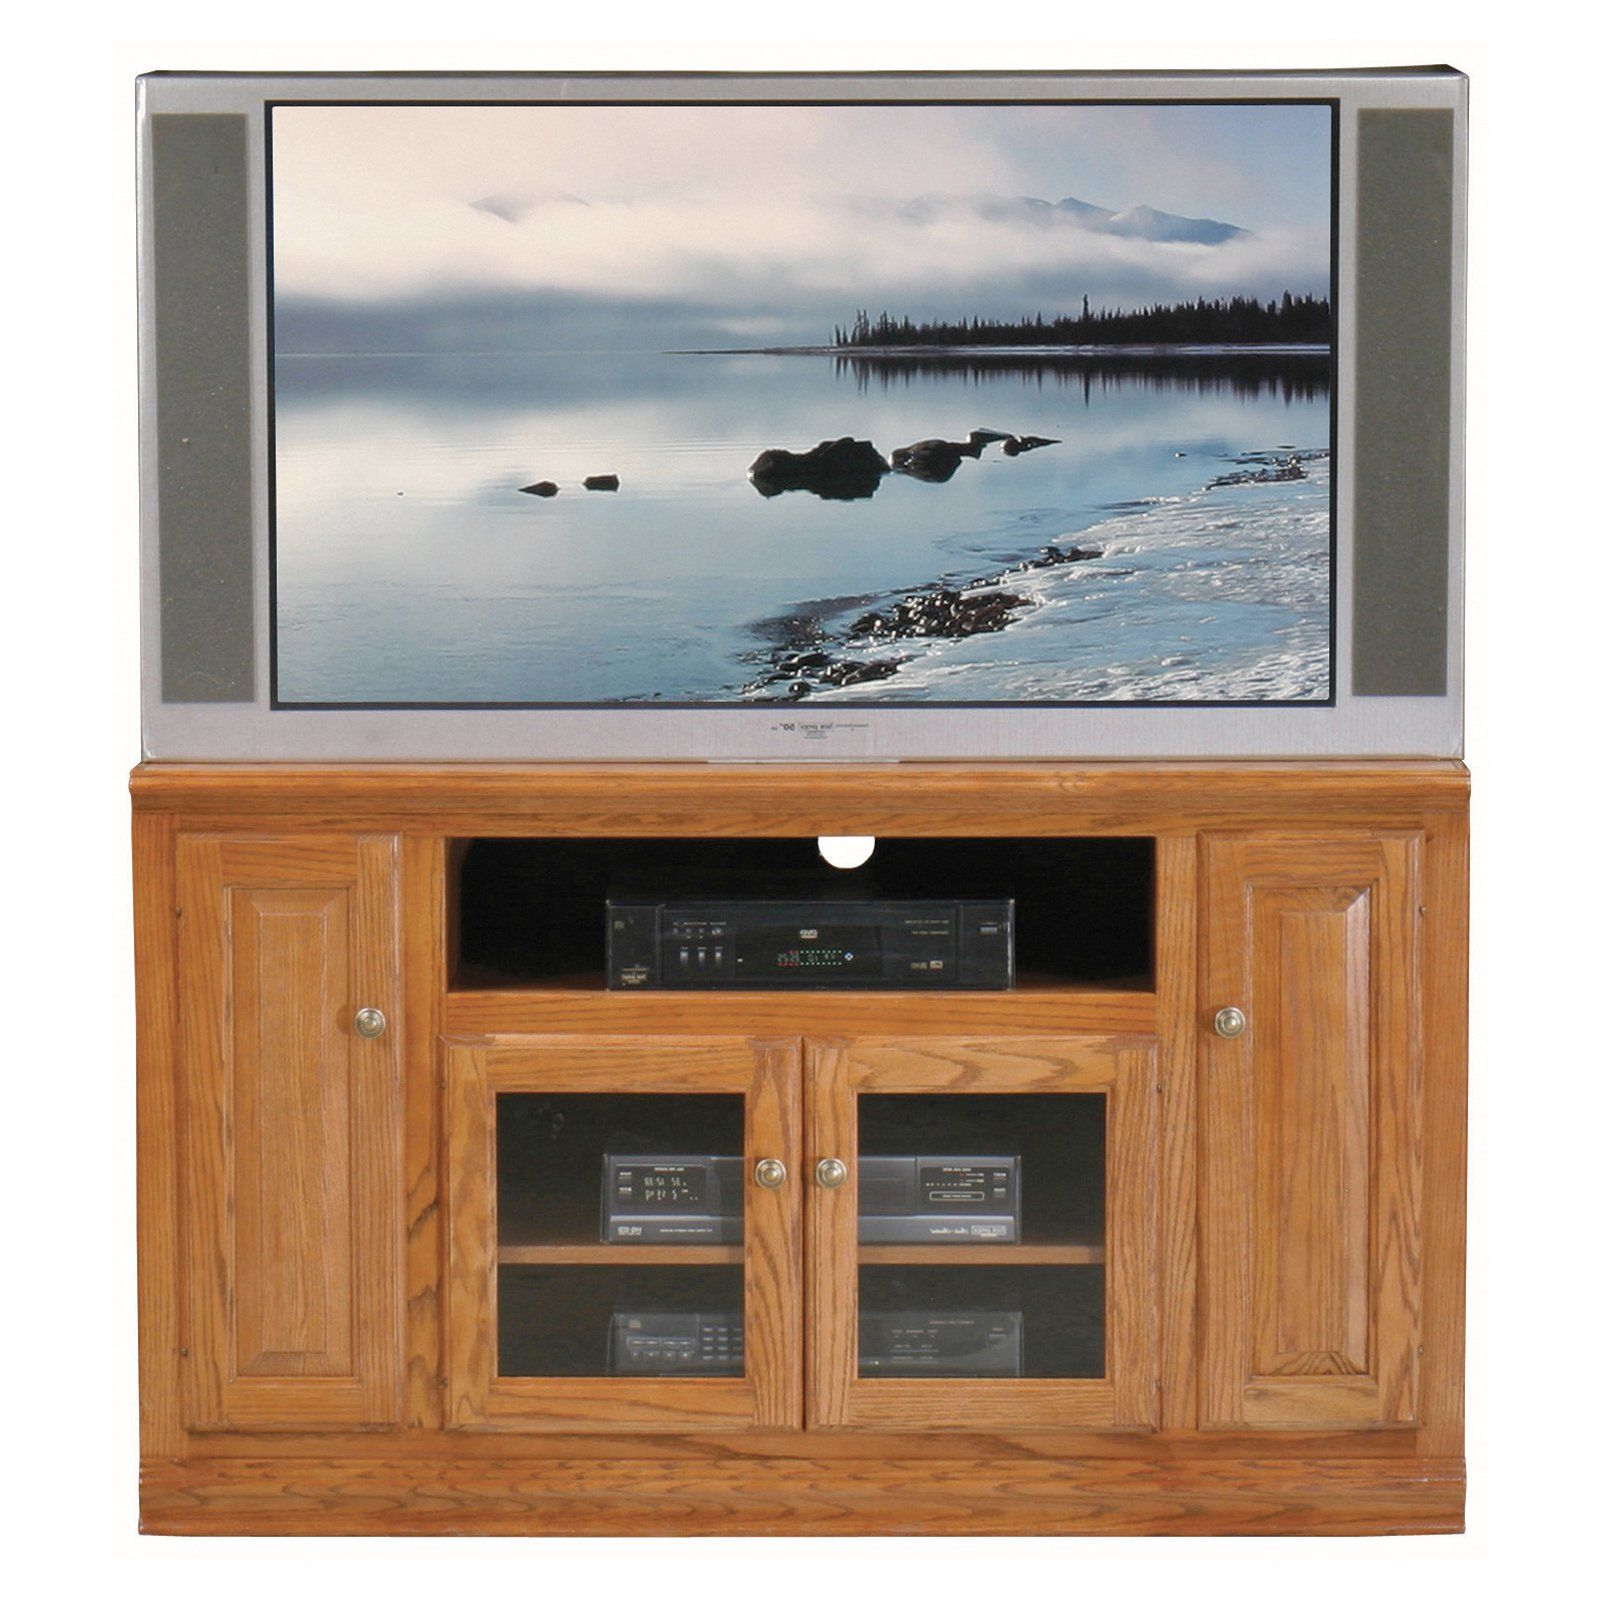 Eagle Furniture Classic Oak Thin Customizable 55 In. Tall Intended For Dillon Tv Stands Oak (Gallery 6 of 20)